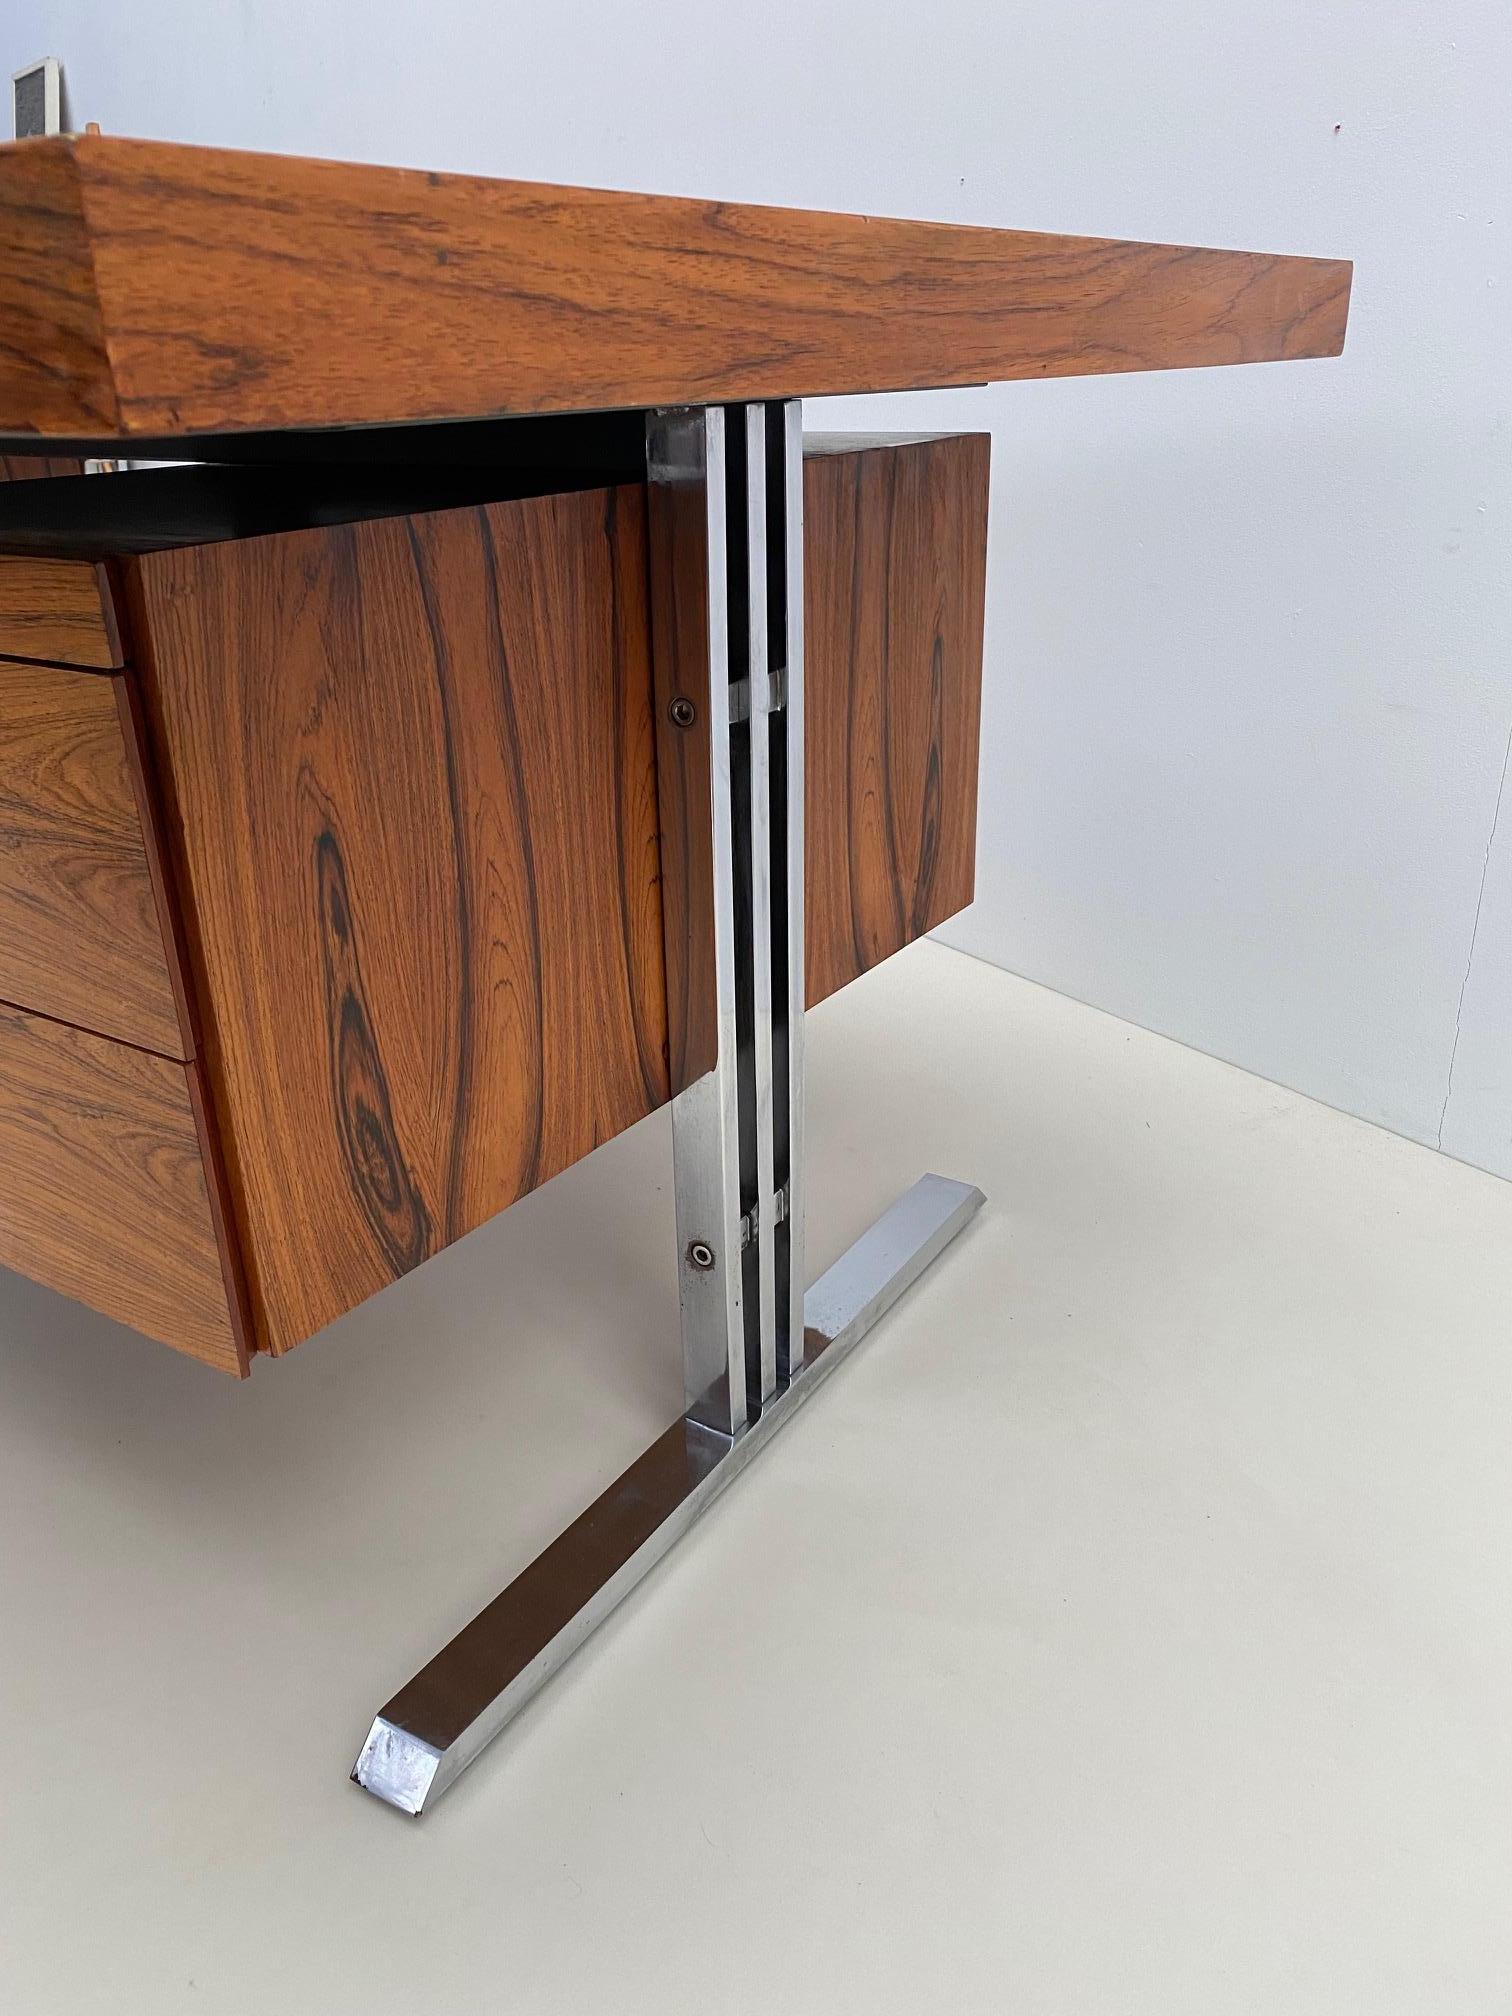 Mid-Century Modern Italian Desk with Drawers , Wood and Chrome, 1970s For Sale 2